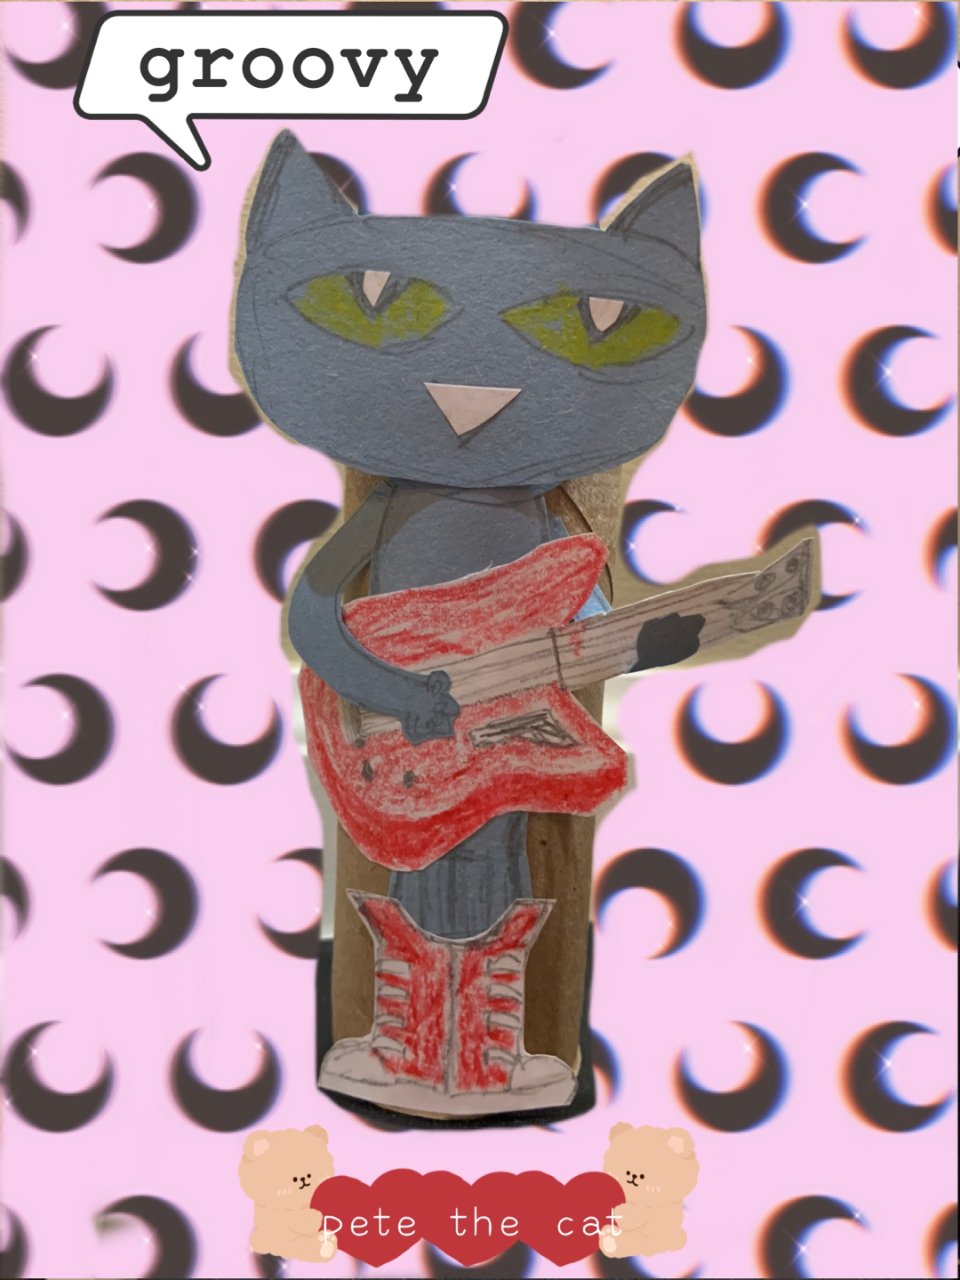 pete the cat puppets